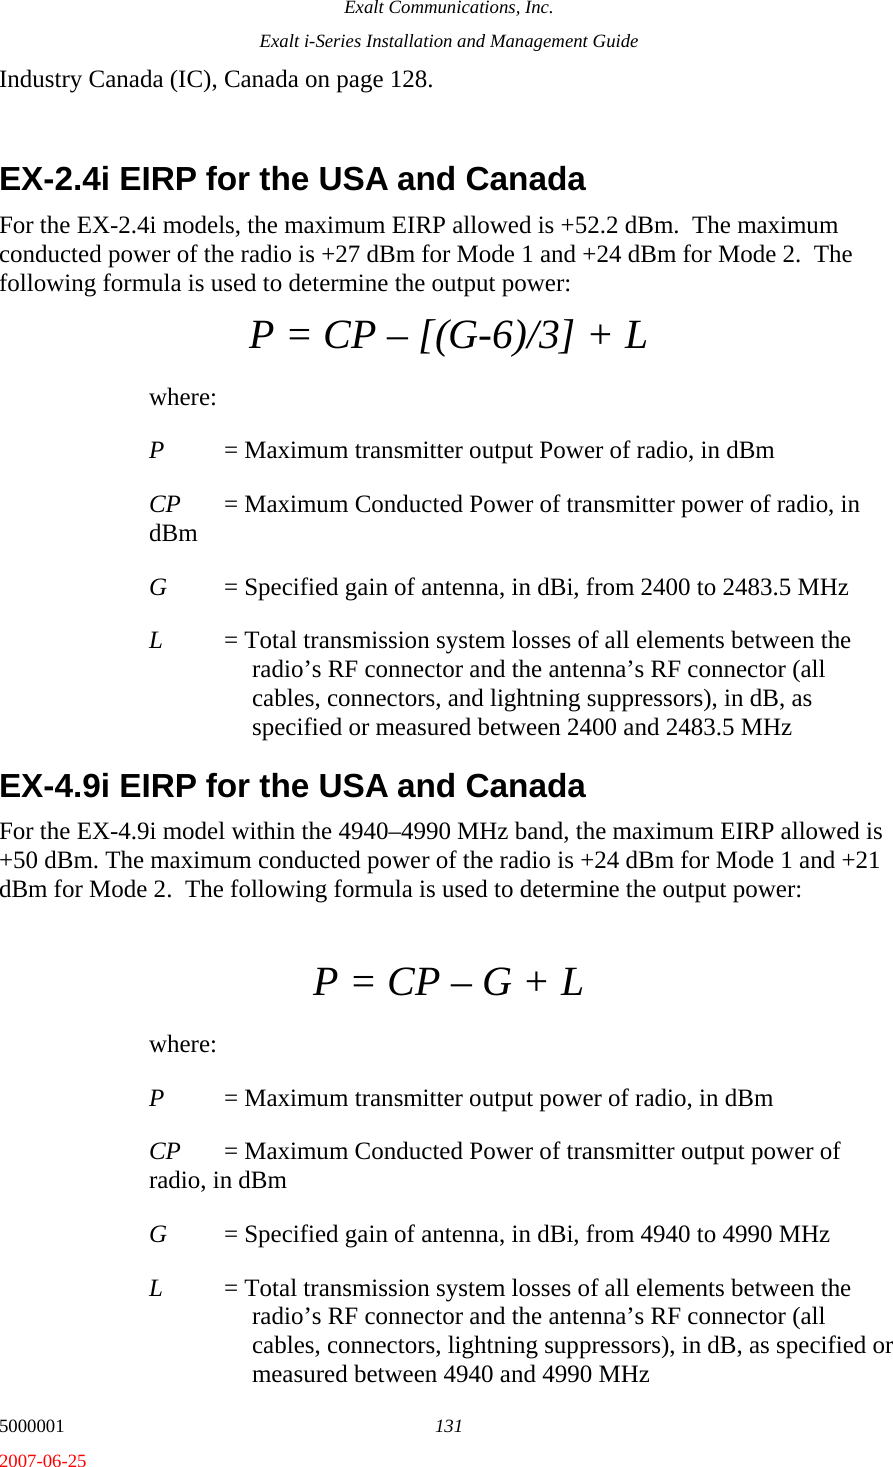 Exalt Communications, Inc. Exalt i-Series Installation and Management Guide 5000001  131 2007-06-25 Industry Canada (IC), Canada on page 128.  EX-2.4i EIRP for the USA and Canada For the EX-2.4i models, the maximum EIRP allowed is +52.2 dBm.  The maximum conducted power of the radio is +27 dBm for Mode 1 and +24 dBm for Mode 2.  The following formula is used to determine the output power: P = CP – [(G-6)/3] + L where: P  = Maximum transmitter output Power of radio, in dBm CP  = Maximum Conducted Power of transmitter power of radio, in dBm G  = Specified gain of antenna, in dBi, from 2400 to 2483.5 MHz L  = Total transmission system losses of all elements between the radio’s RF connector and the antenna’s RF connector (all cables, connectors, and lightning suppressors), in dB, as specified or measured between 2400 and 2483.5 MHz EX-4.9i EIRP for the USA and Canada For the EX-4.9i model within the 4940–4990 MHz band, the maximum EIRP allowed is +50 dBm. The maximum conducted power of the radio is +24 dBm for Mode 1 and +21 dBm for Mode 2.  The following formula is used to determine the output power:  P = CP – G + L where: P  = Maximum transmitter output power of radio, in dBm CP  = Maximum Conducted Power of transmitter output power of radio, in dBm G  = Specified gain of antenna, in dBi, from 4940 to 4990 MHz L  = Total transmission system losses of all elements between the radio’s RF connector and the antenna’s RF connector (all cables, connectors, lightning suppressors), in dB, as specified or measured between 4940 and 4990 MHz 